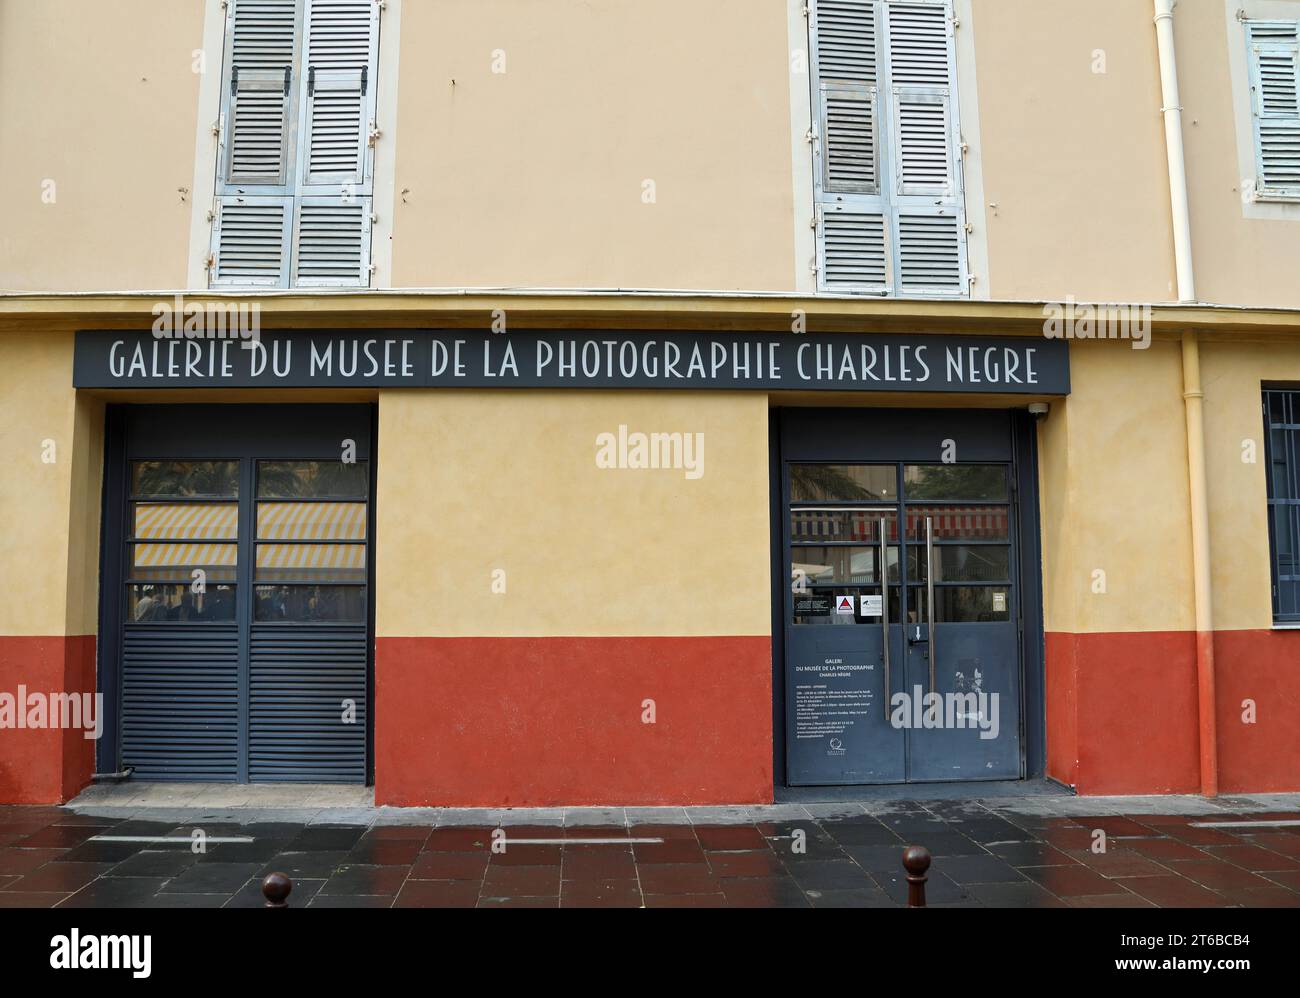 Galerie du Musee de la Photographie Charles Negre at a 1930s building in Nice Stock Photo